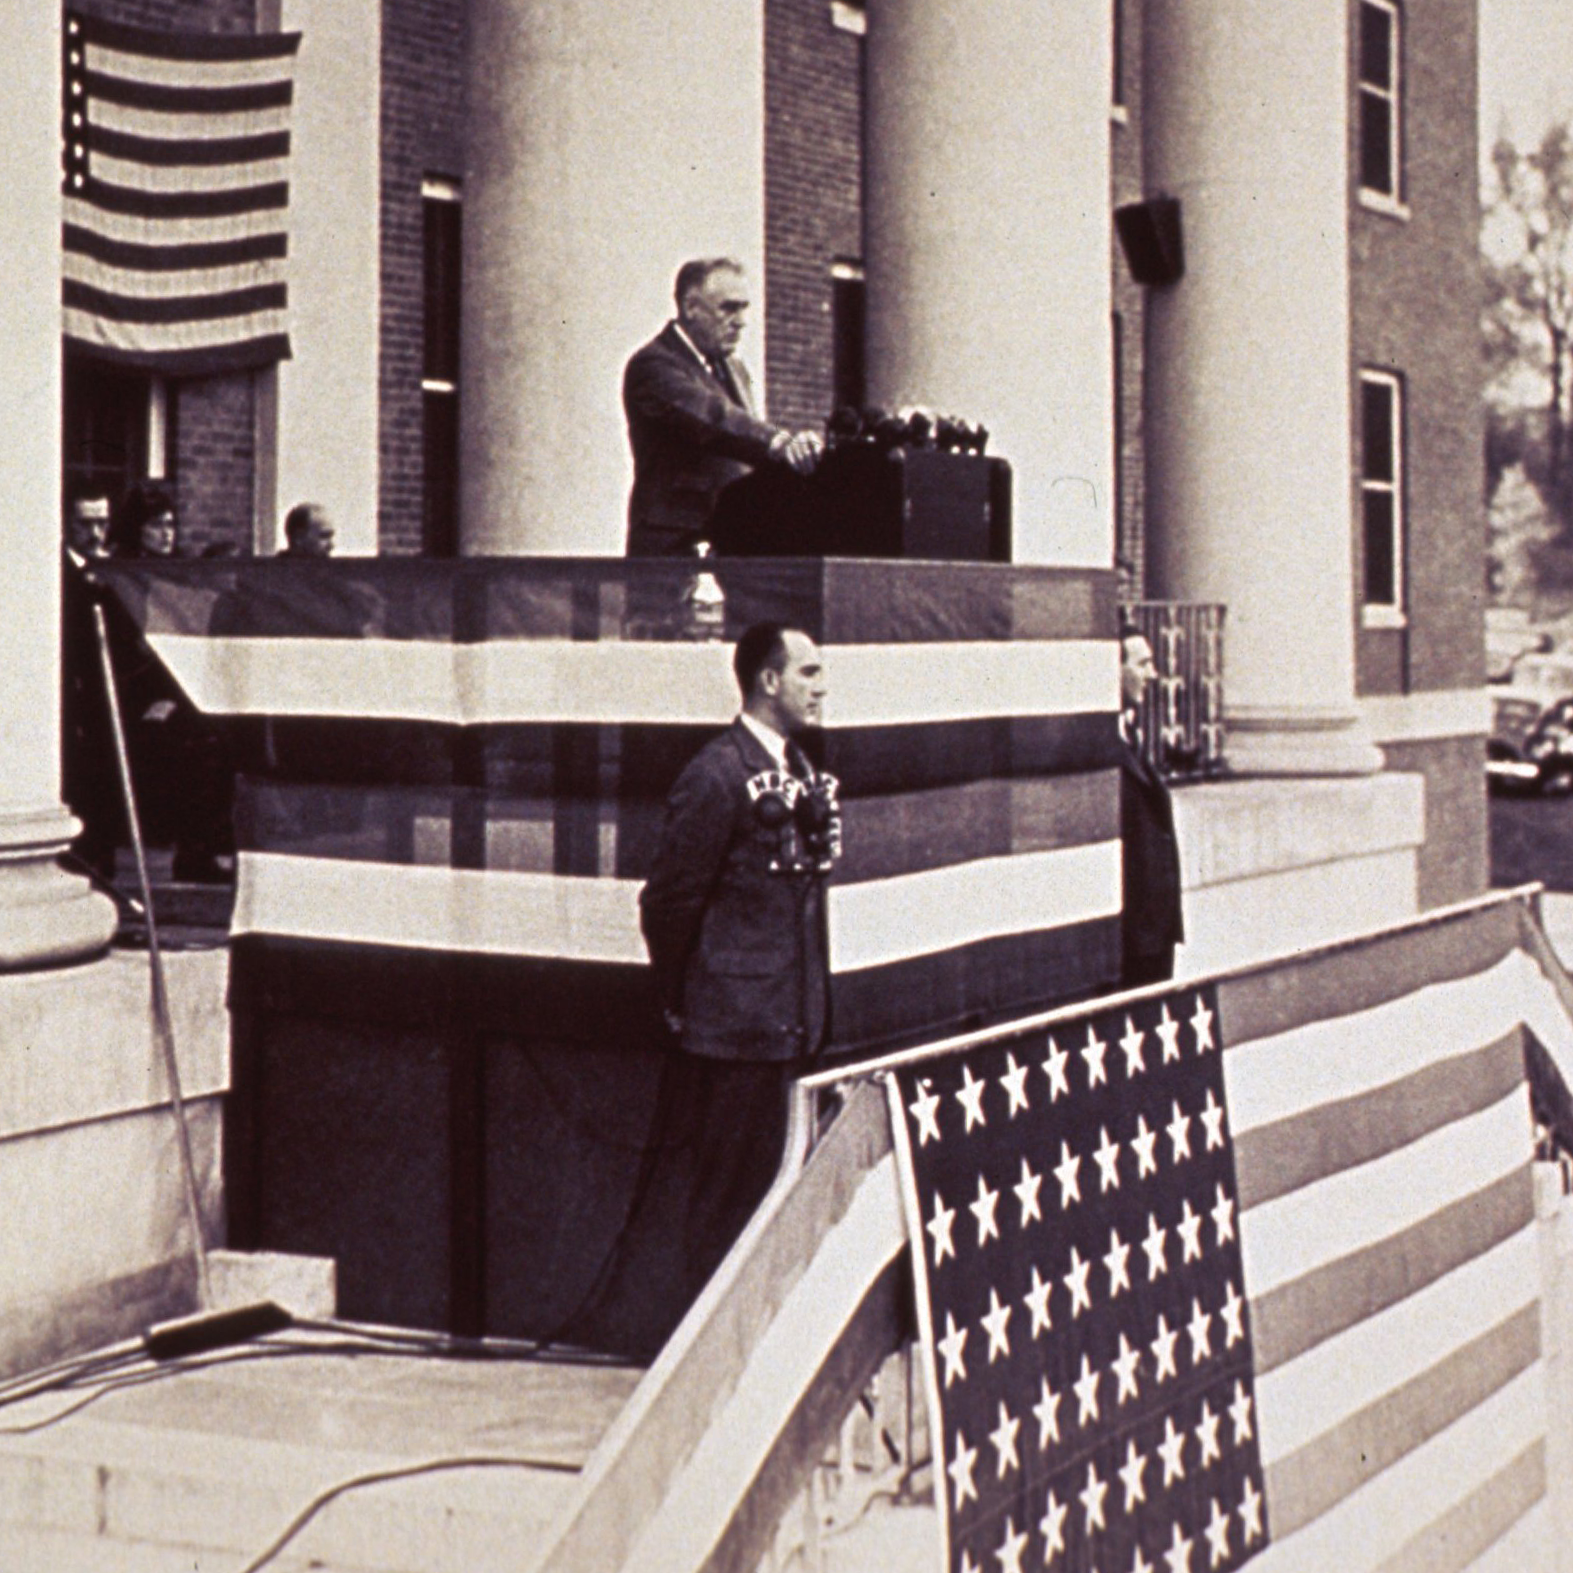 FDR speaking at the NIH